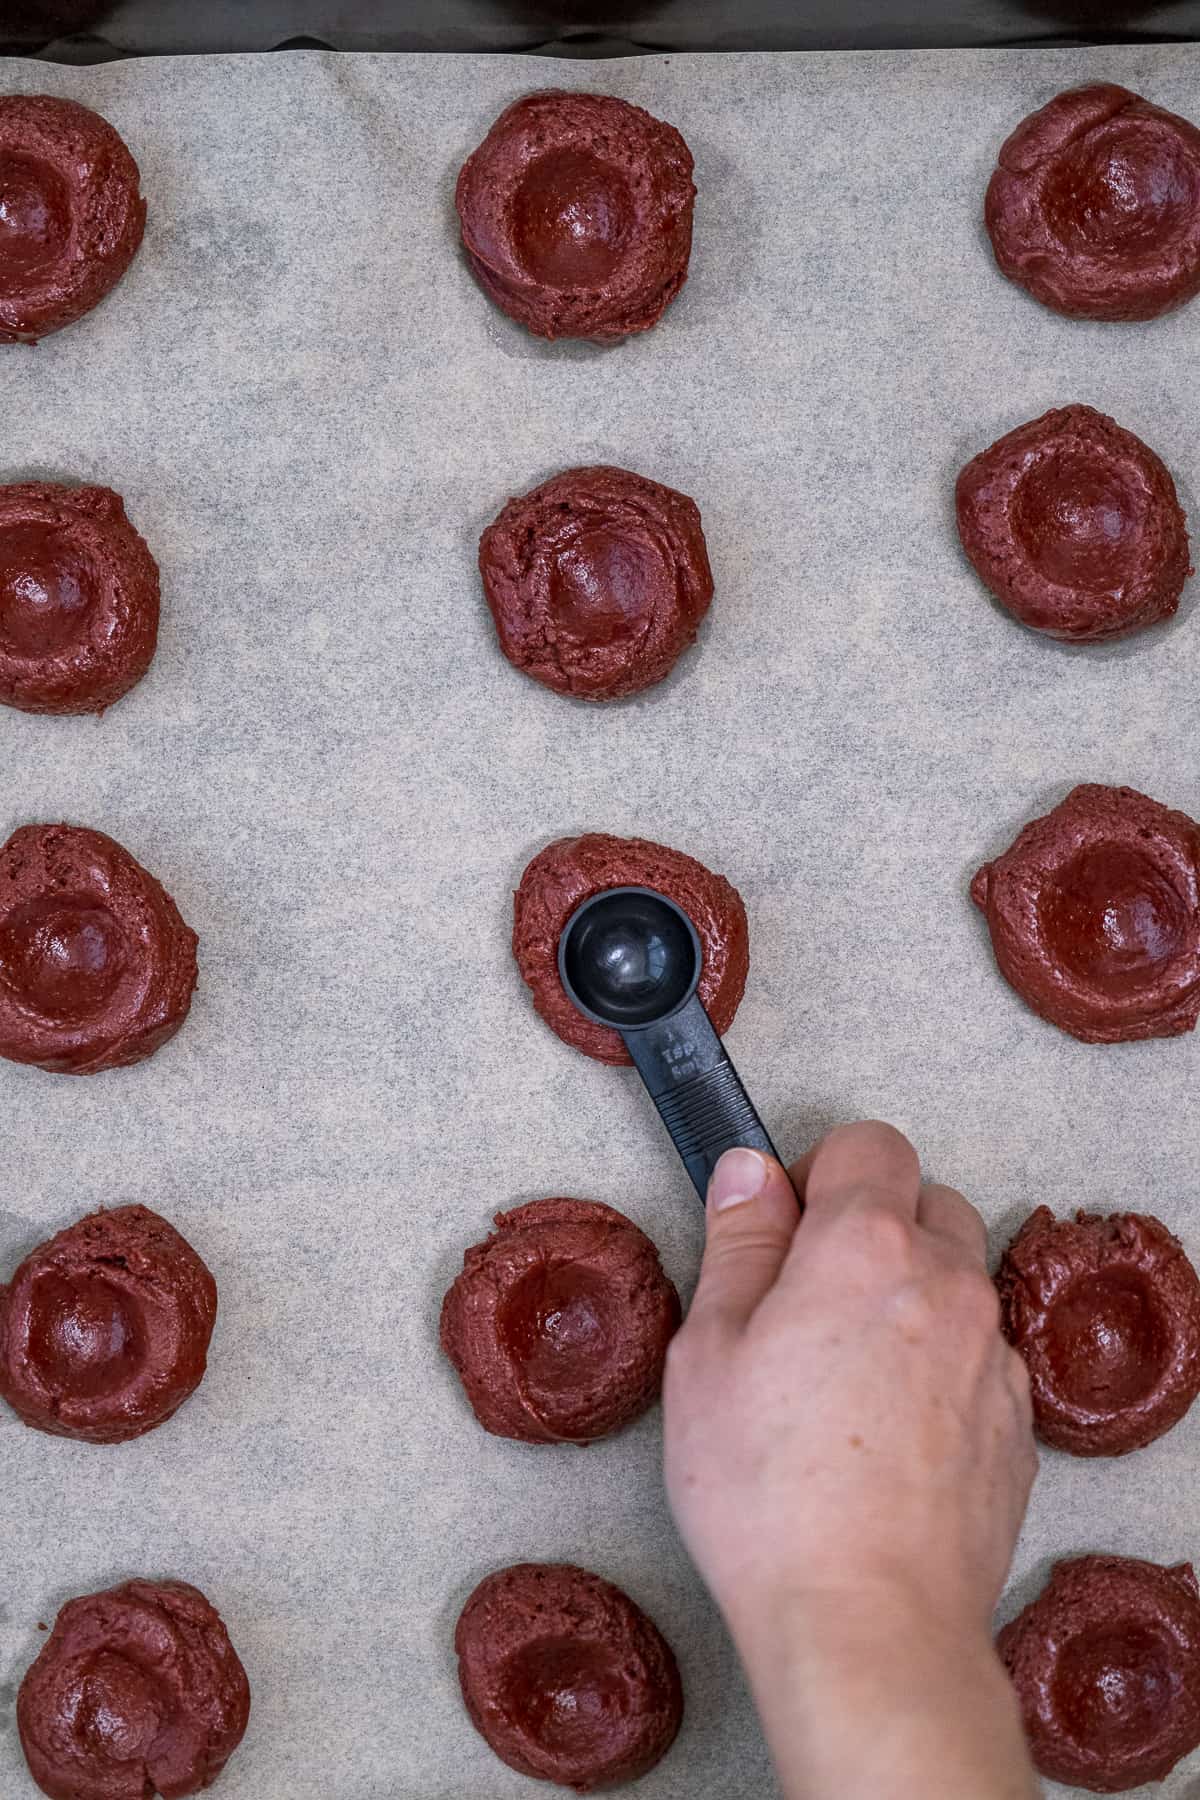 A hand making indentations with a teaspoon on red velvet cookie dough balls on a baking sheet.